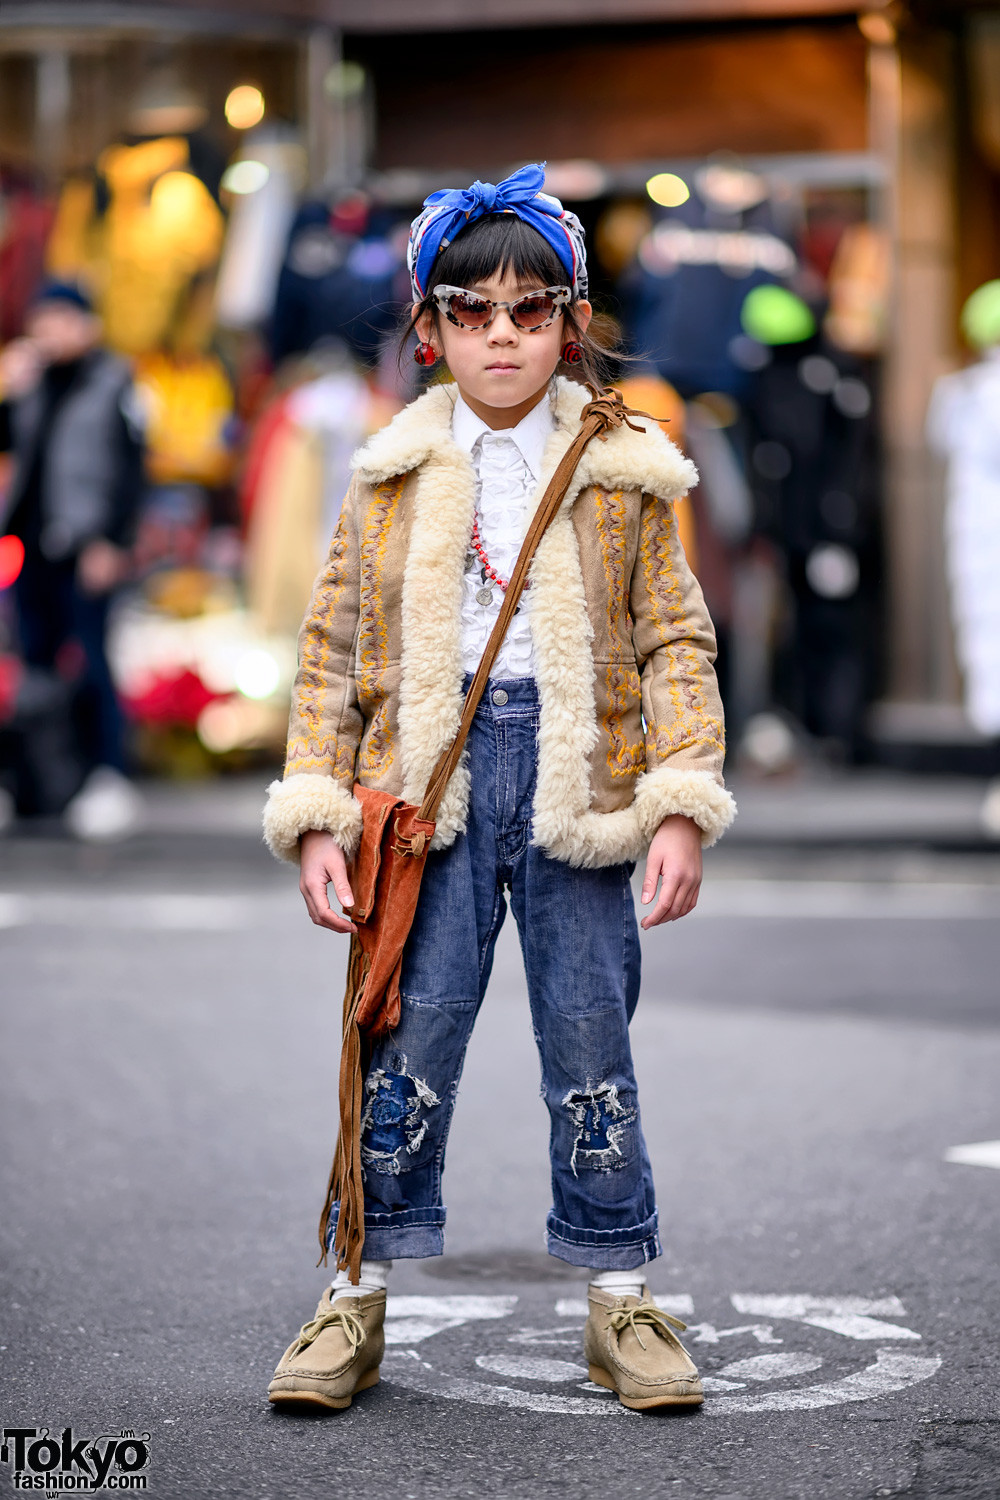 70'S Fashion For Kids/Girls
 6 Year Old Harajuku Girl in 1950s and 1970s Vintage Kids